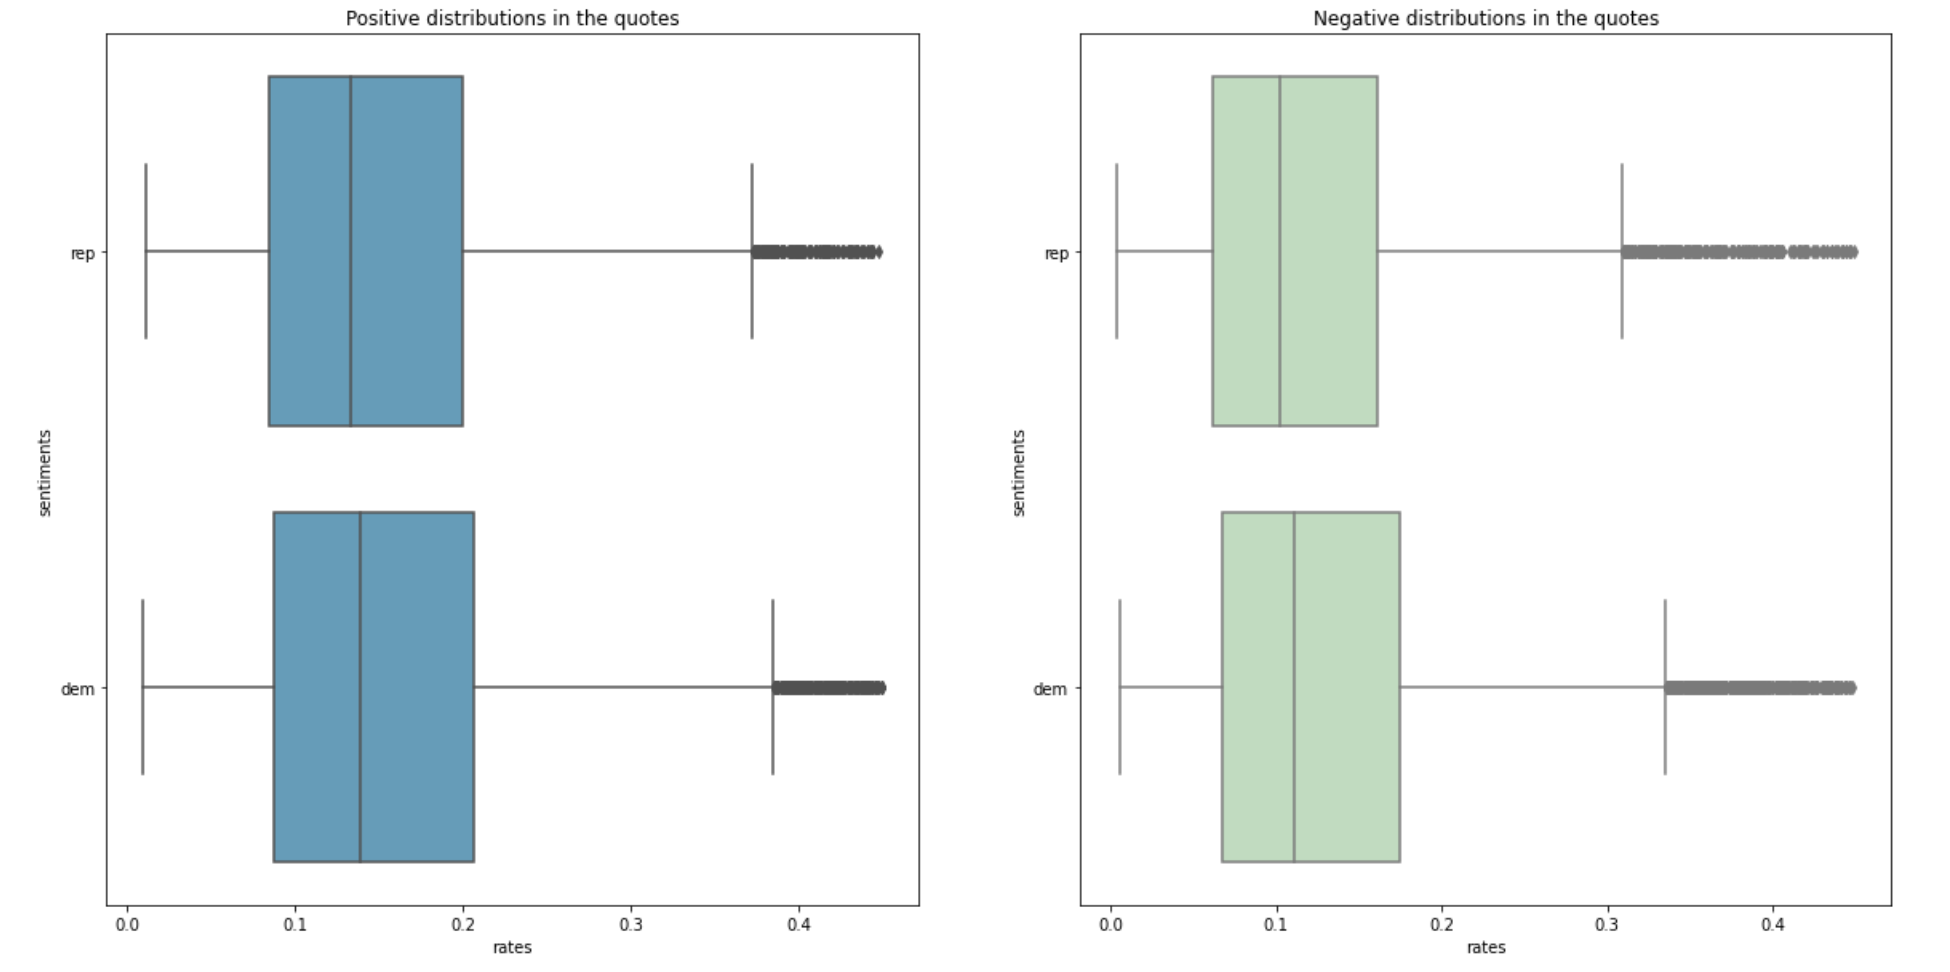 sentiment analyses for political parties